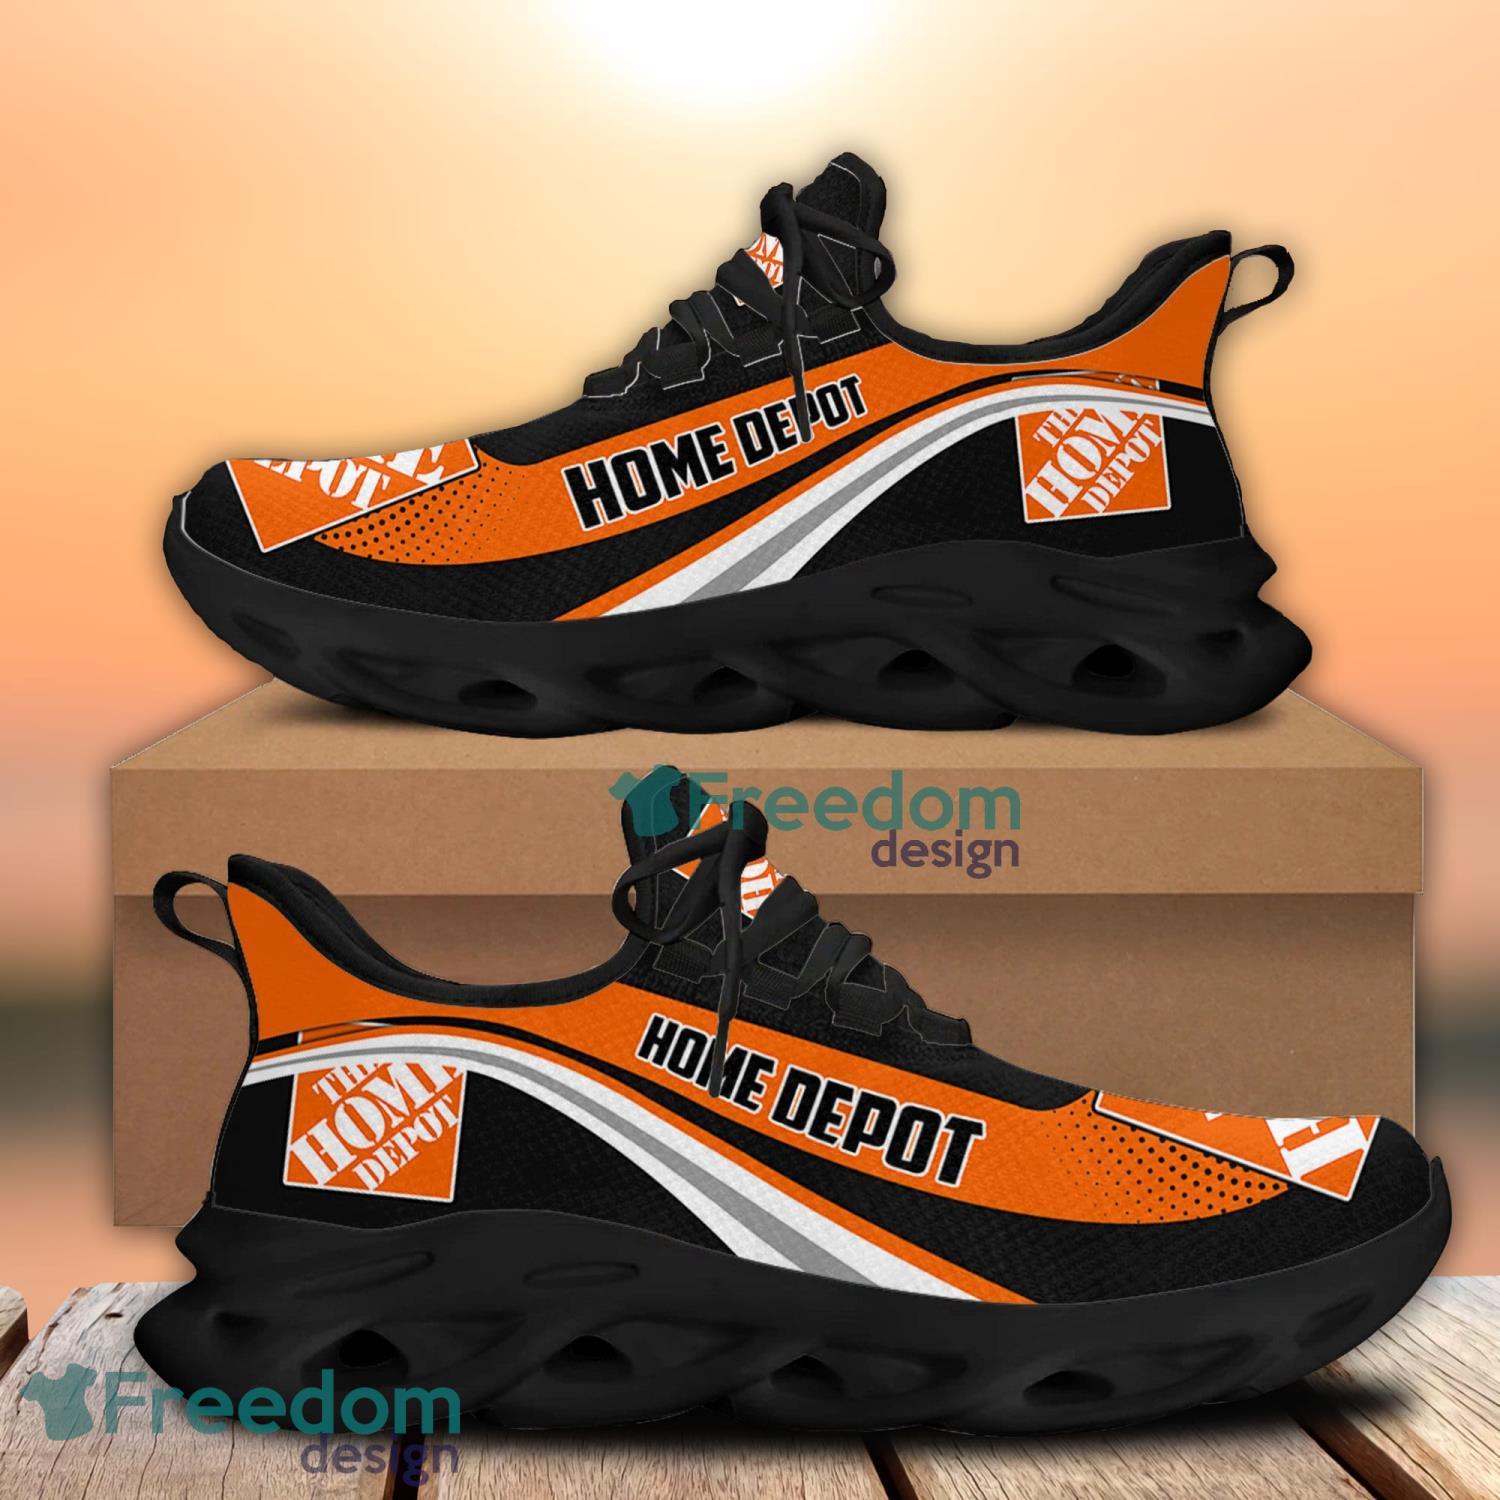 Home Depot Sneakers Shoes Men And Women Max Soul Shoes